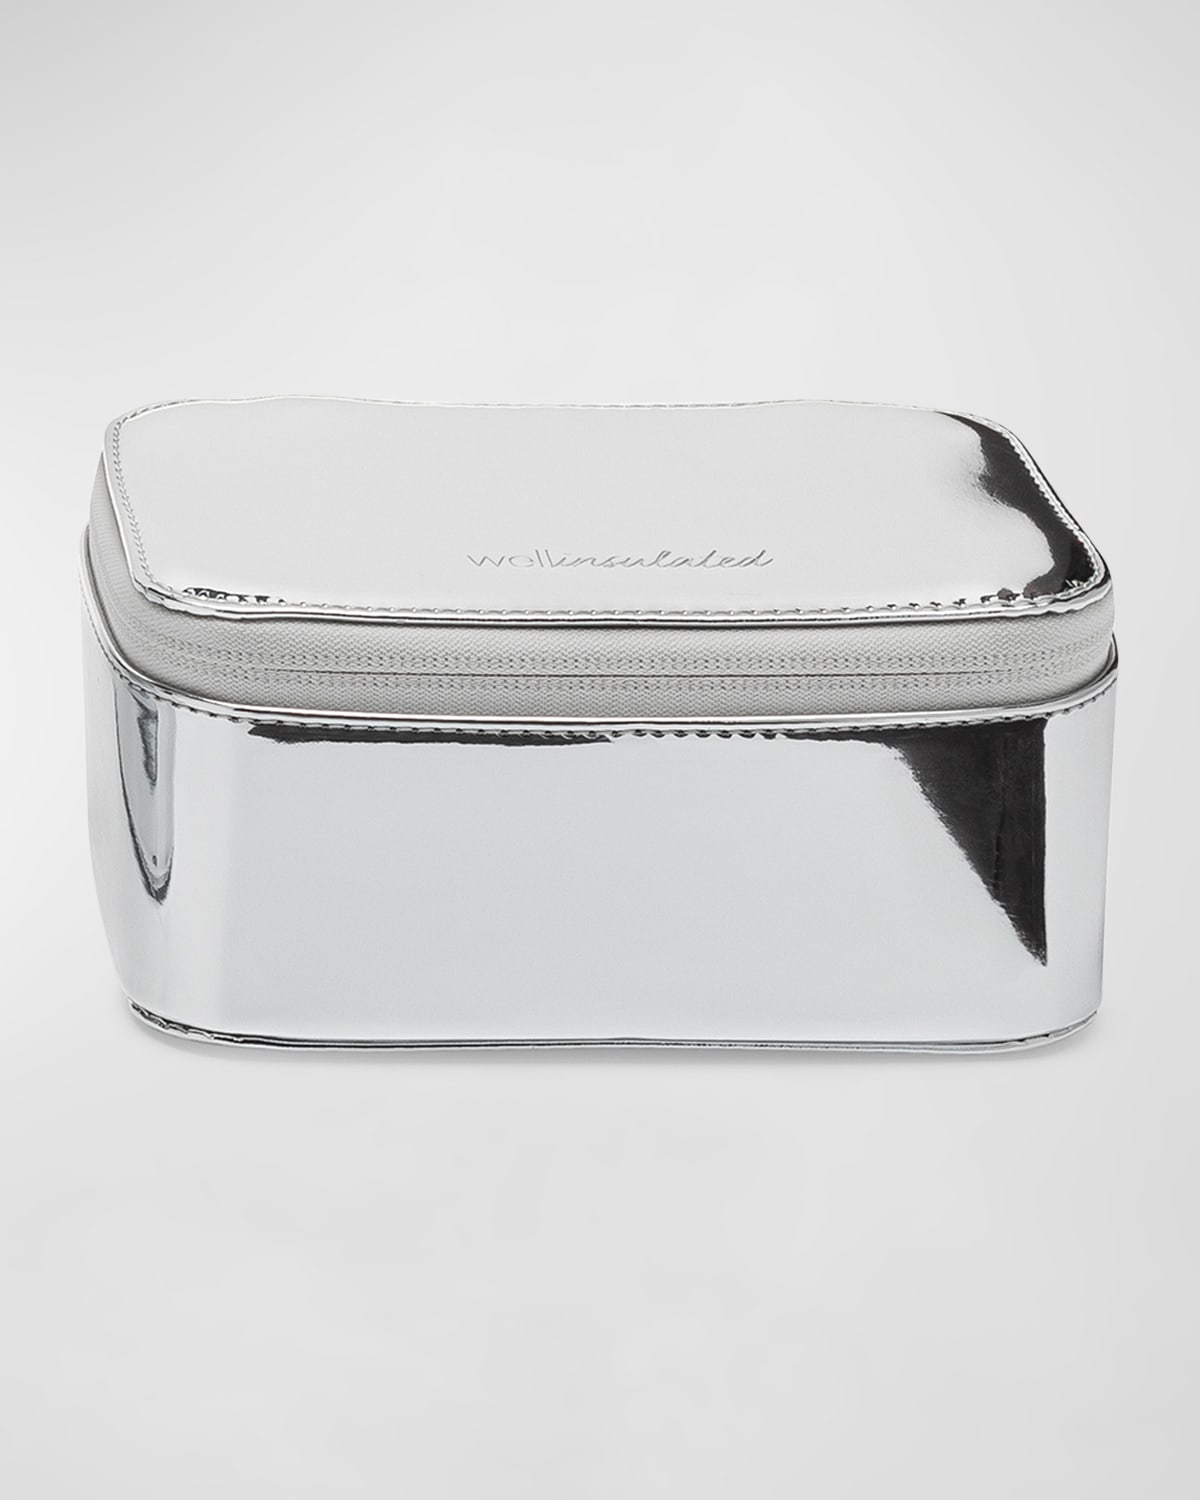 Wellinsulated Mini Performance Travel Case In Silver